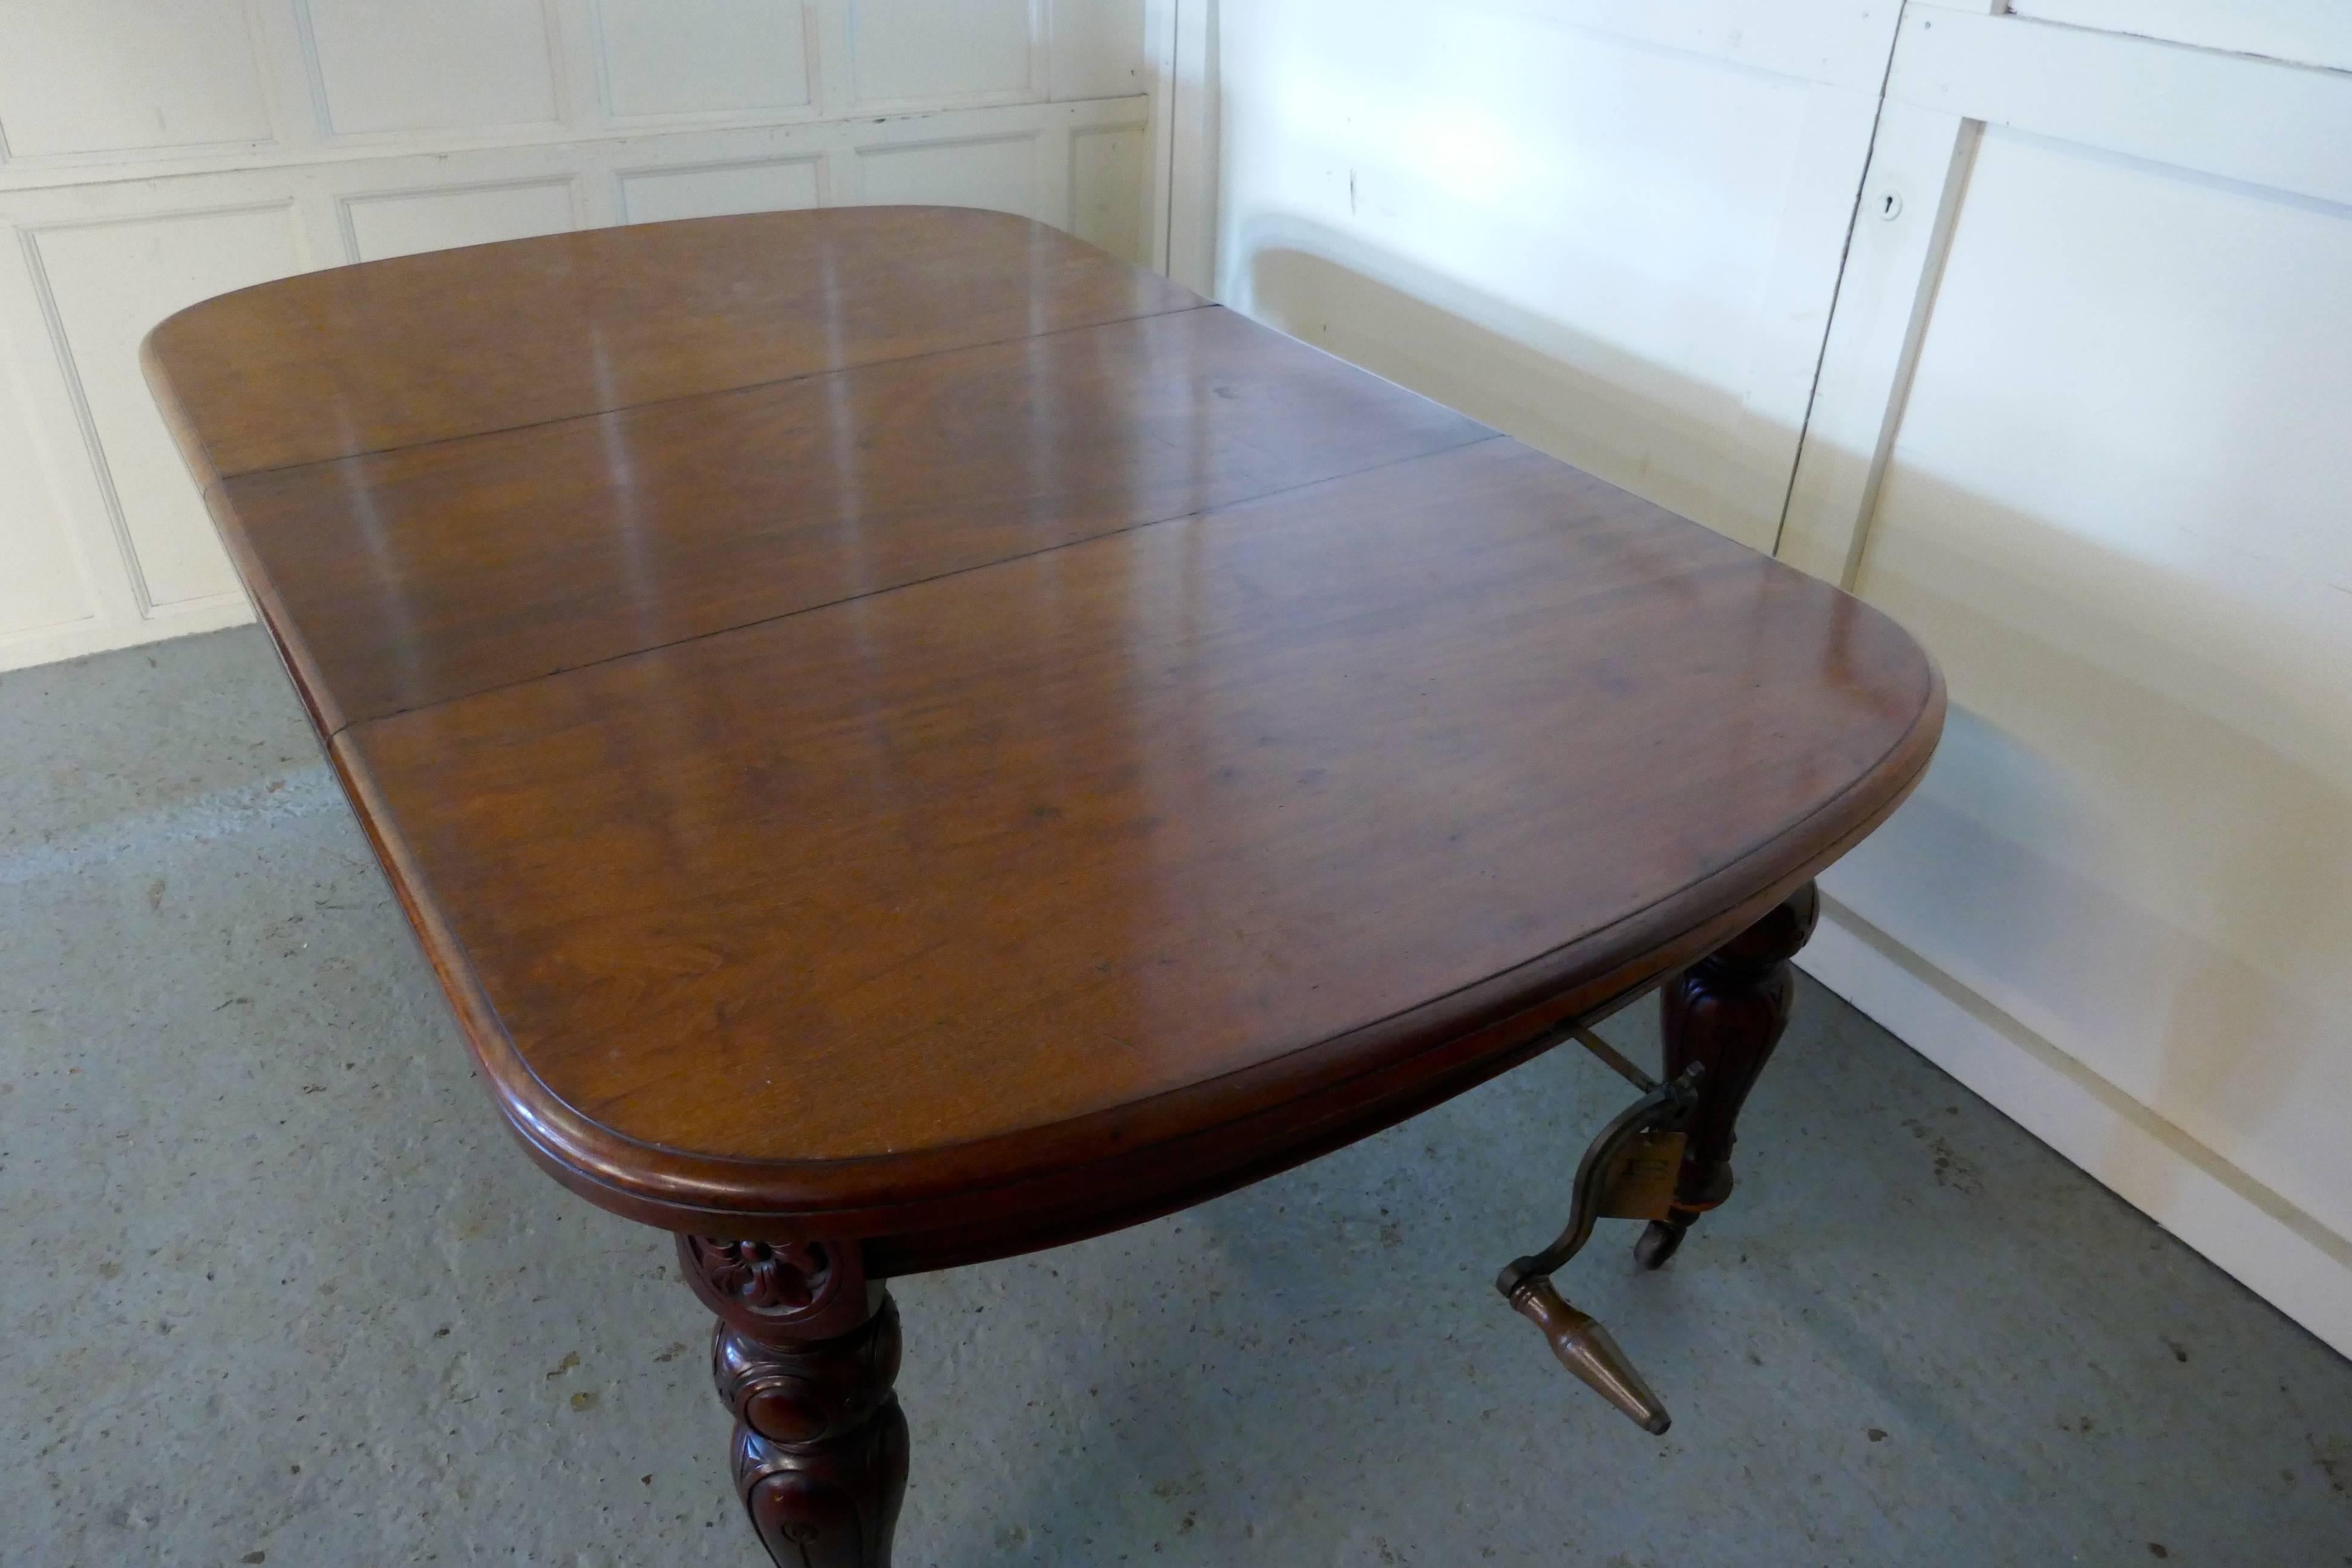 Early Victorian mahogany extending dining table, seats 12 diners

This is a lovely table, it dates from the very early part of the 19th century, the table opens in the centre, by means of a winding mechanism this allows the addition of a solid